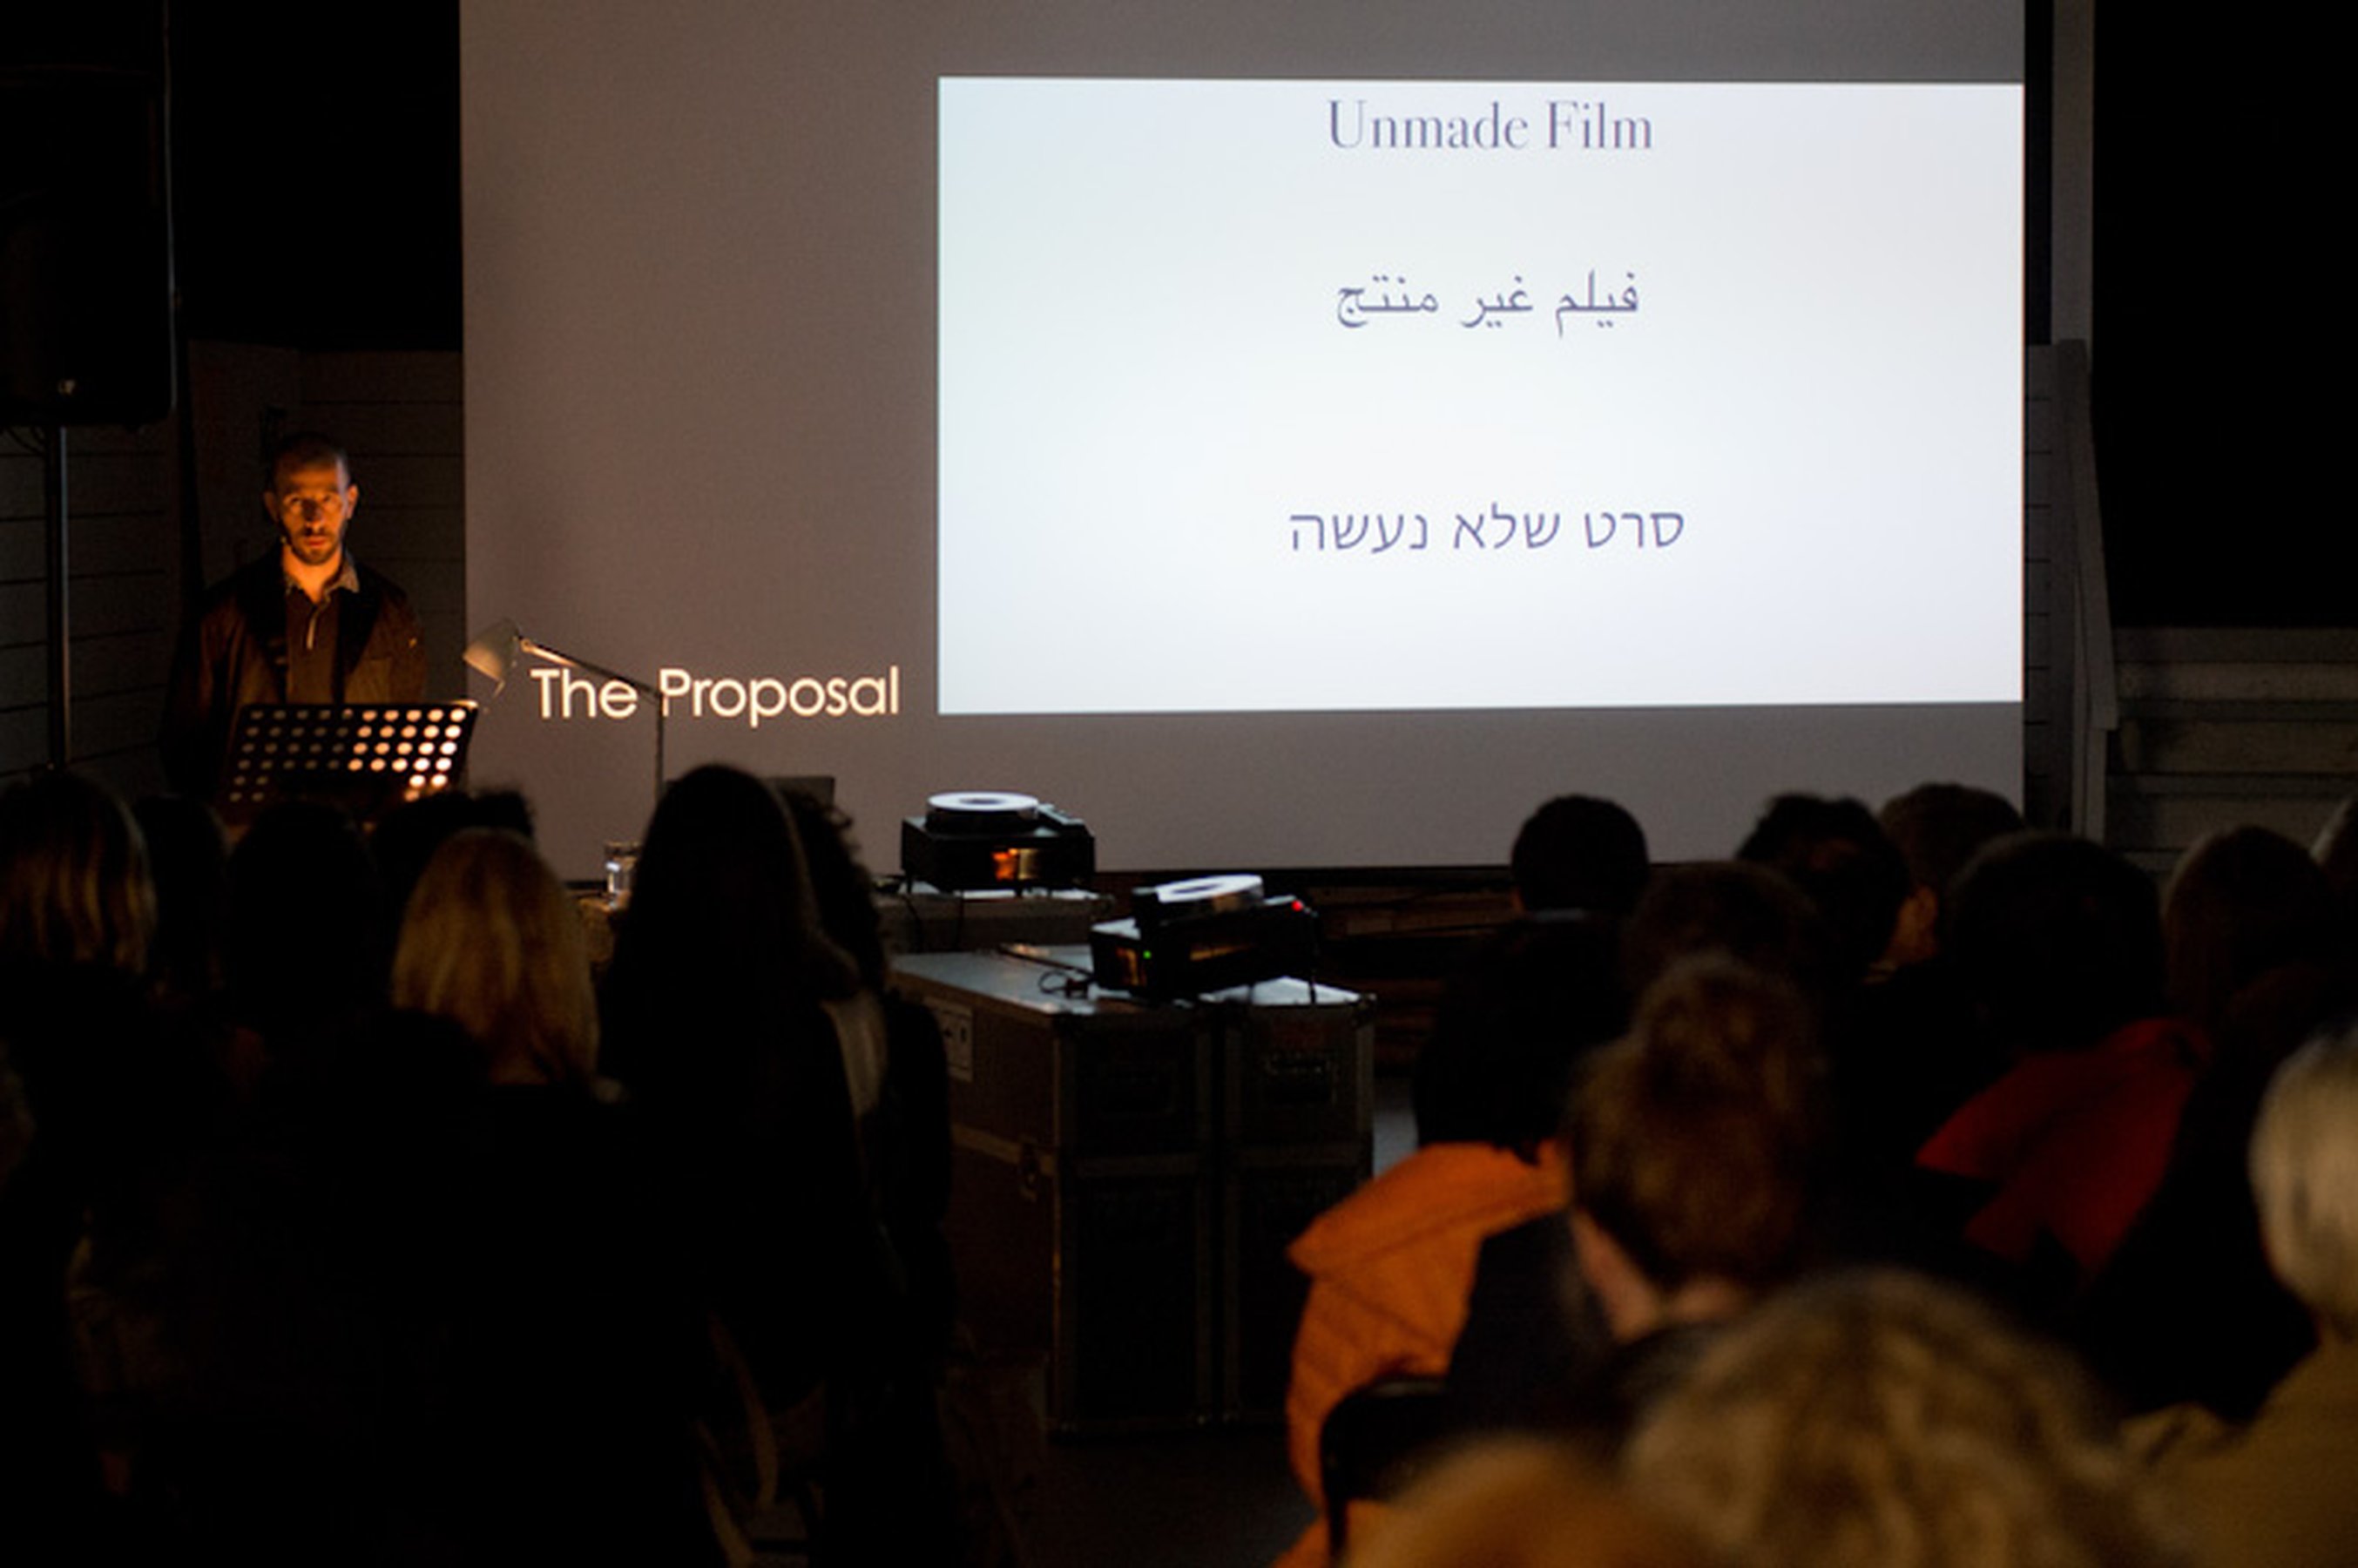 Unmade Film - The Proposal, 2013-2015 lecture performance 45’